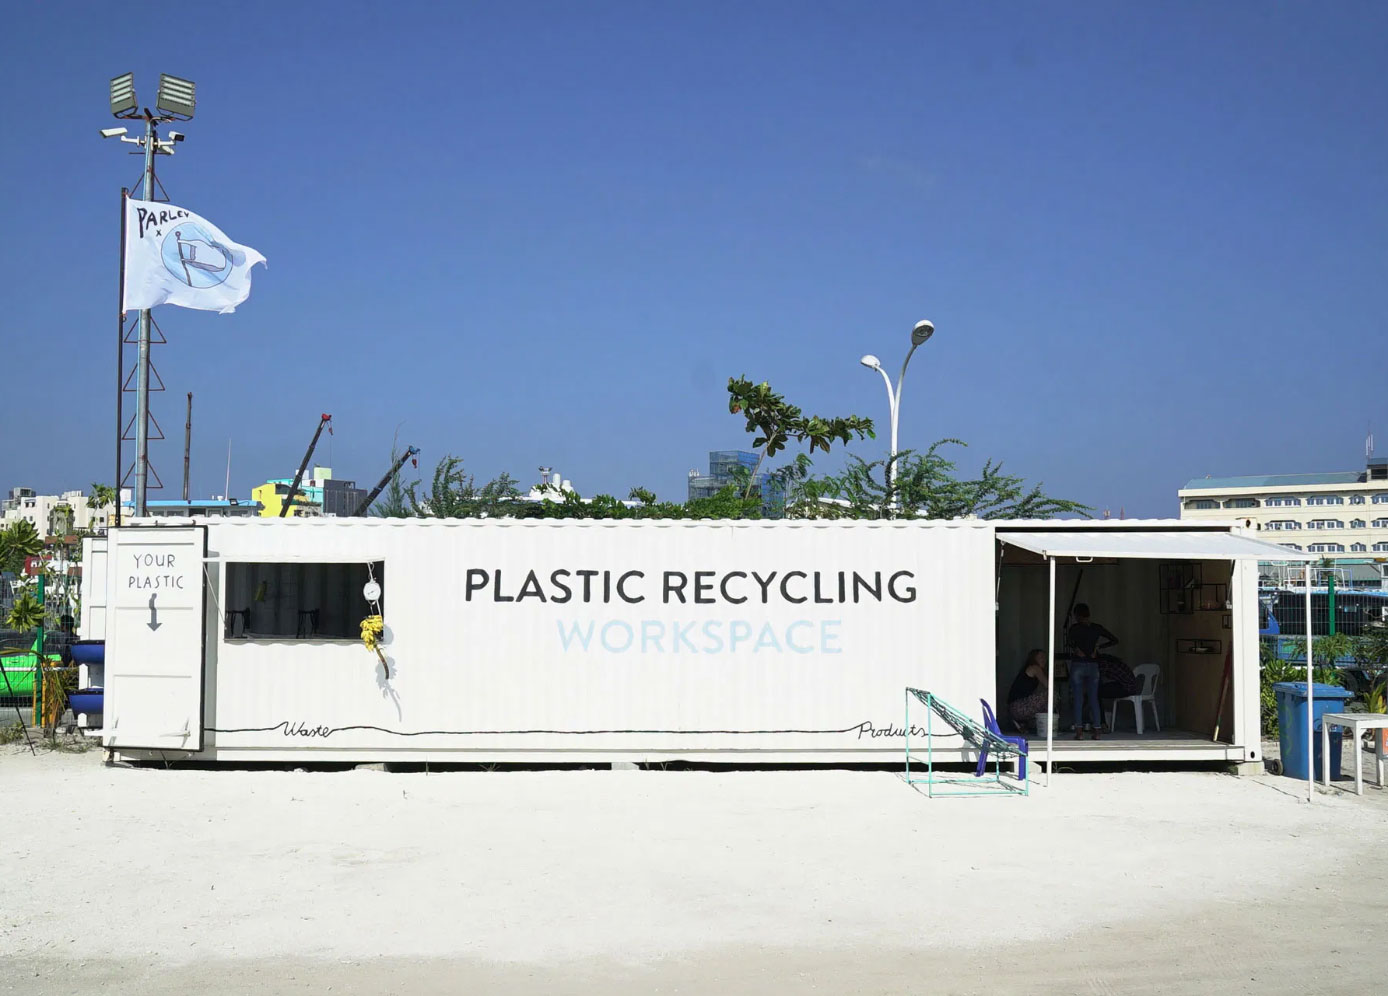 Plastic recycling workshop in a container